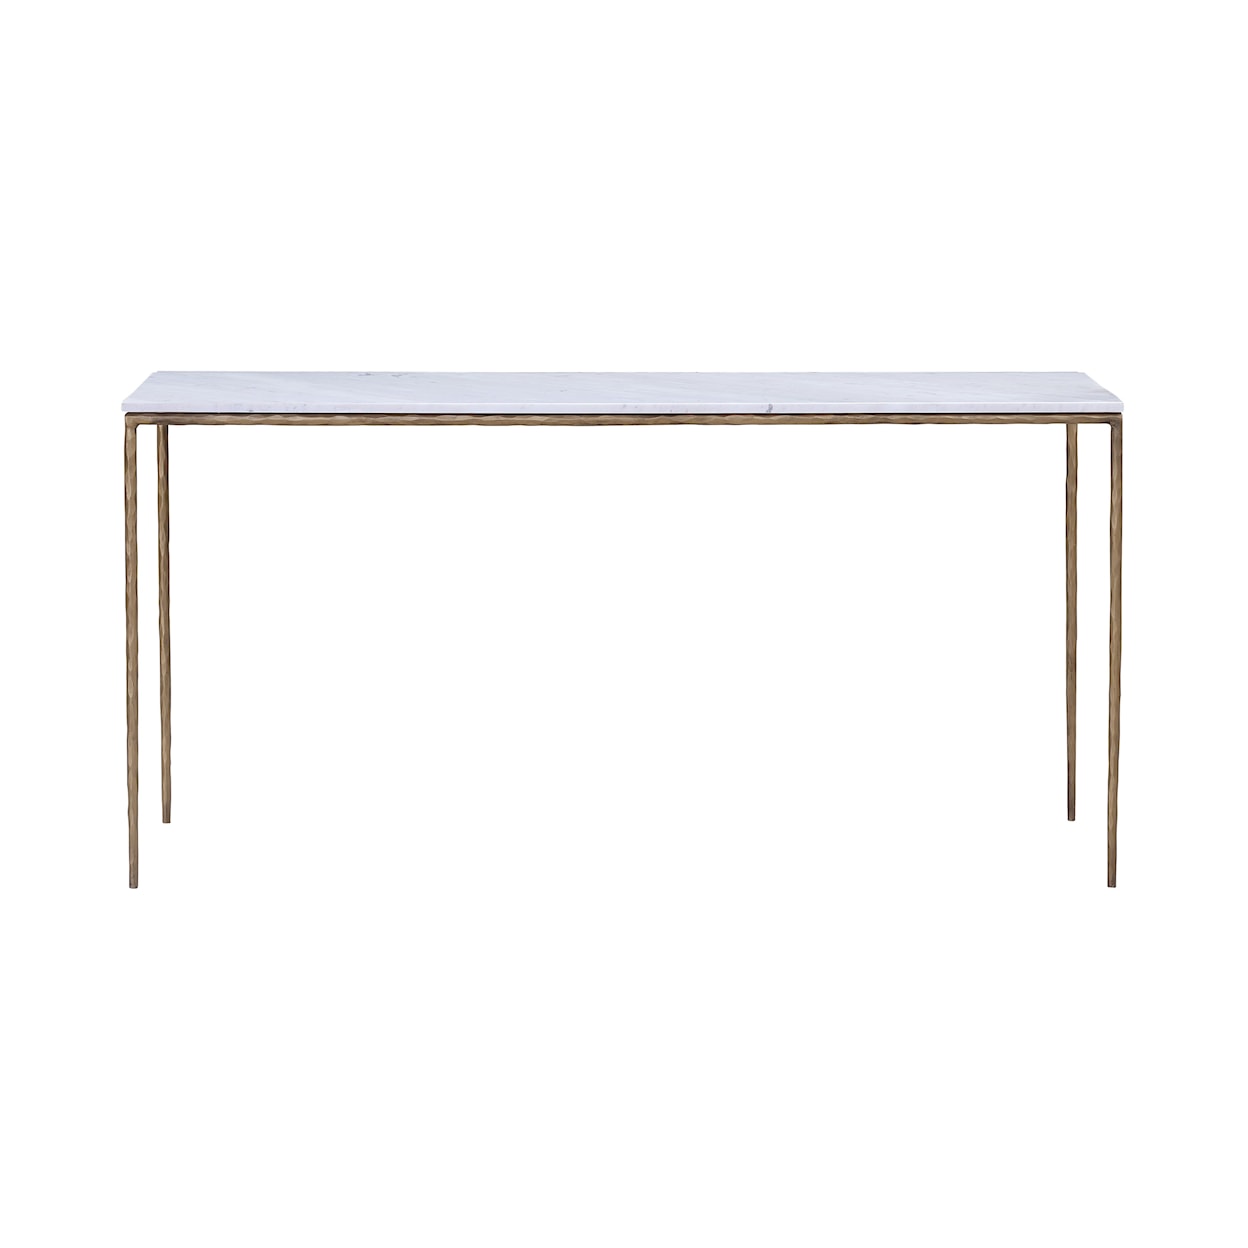 Dovetail Furniture Salas Console Table 